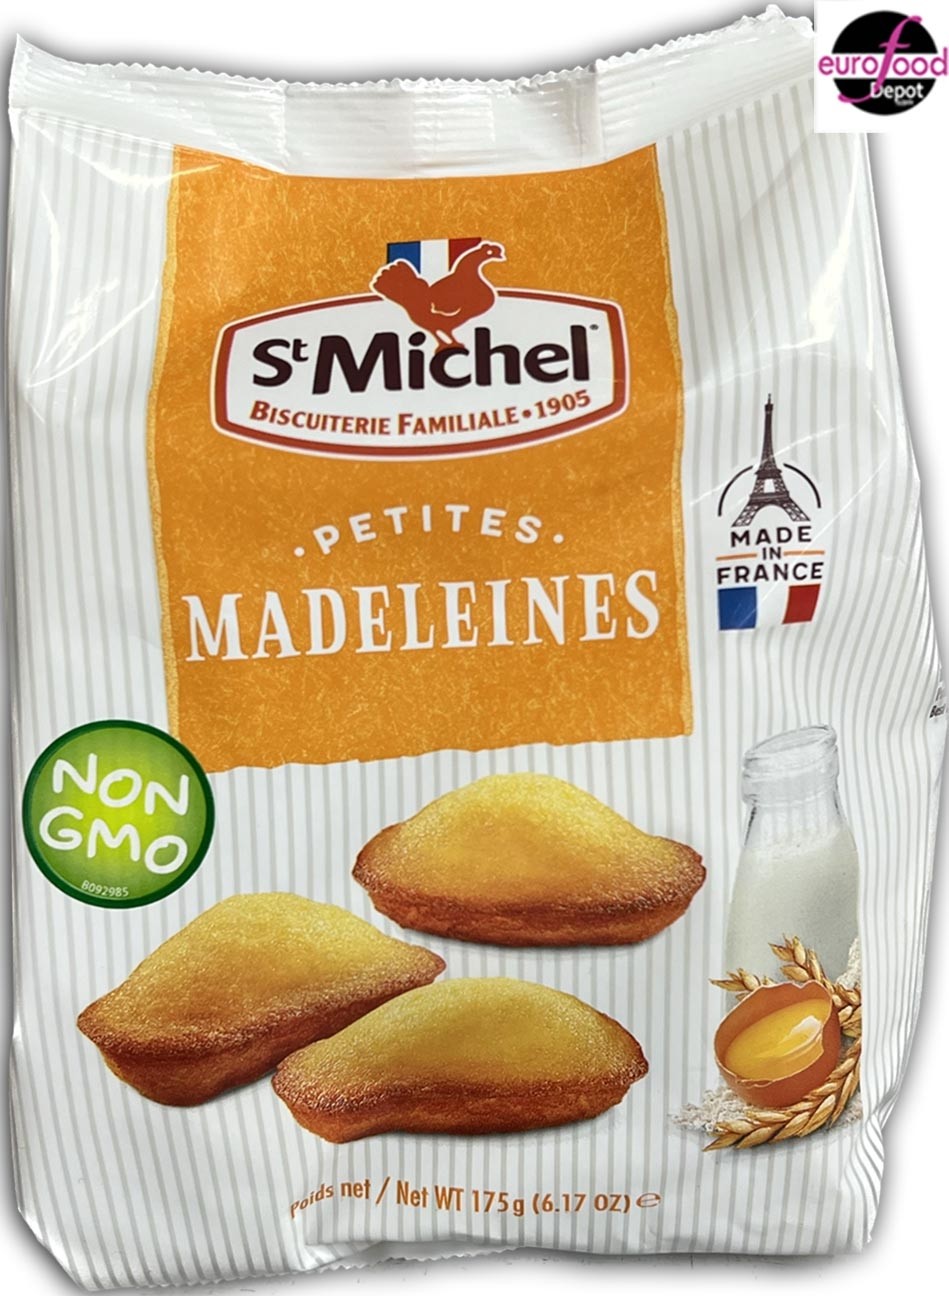 Euro Food Depot - st-michel-mini-madeleine-traditional-french